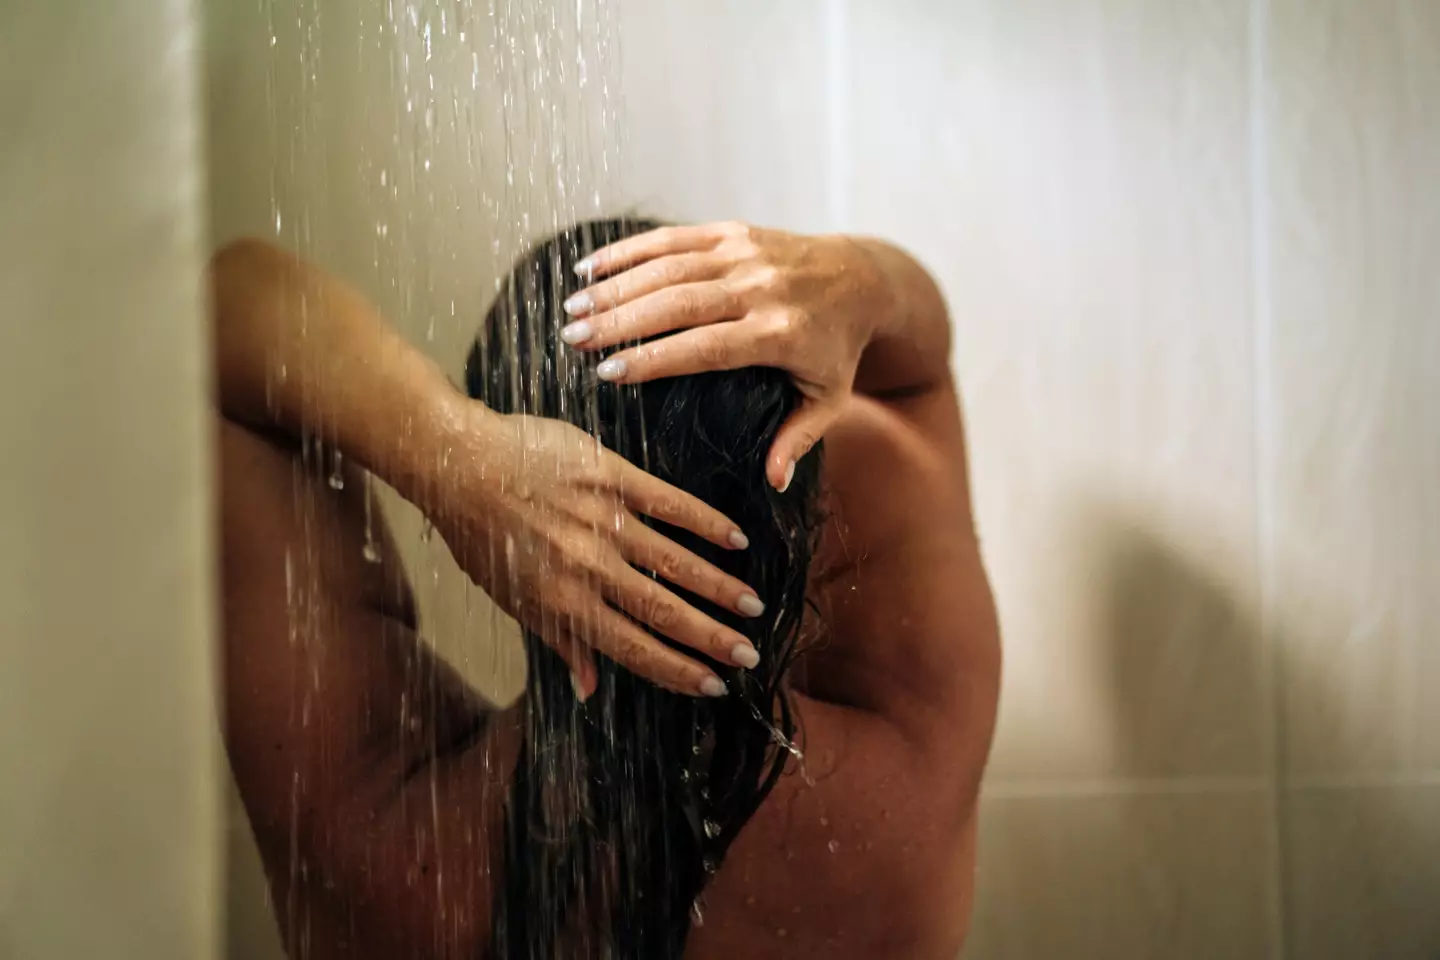 Apparently, women shouldn't be weeing in the shower. (Fiordaliso / Getty Images)